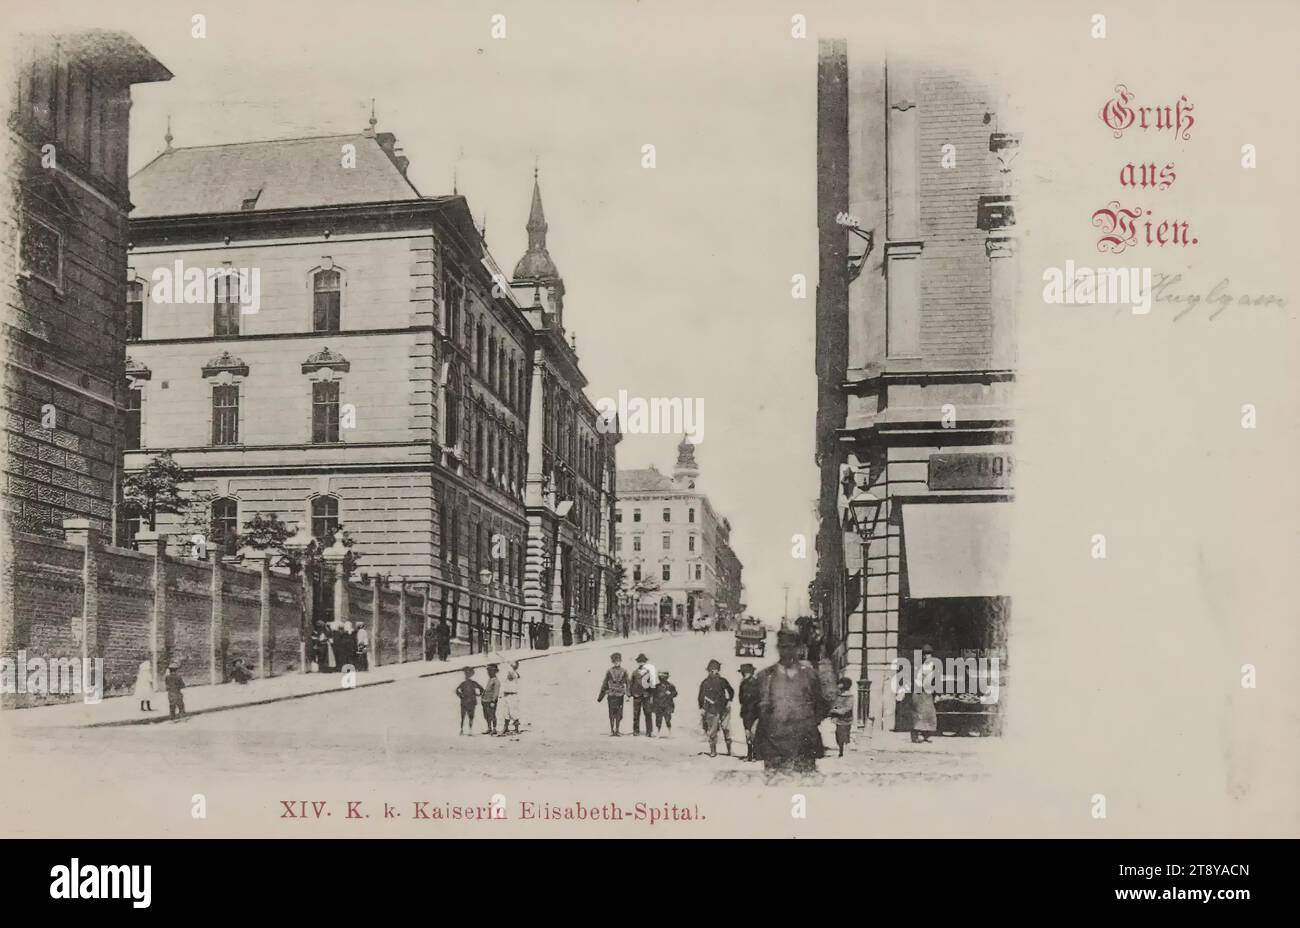 15th, Huglgasse - with Kaiserin-Elisabeth-Spital - view towards Märzstraße, picture postcard, Sperlings Postkartenverlag (M. M. S.), Producer, 1900-1905, paperboard, Collotype, height×width 9, 2×14 cm, Health Care, Vanished Sites and Structures, 15th District: Rudolfsheim-Fünfhaus, hospital, with people, Kaiserin-Elisabeth-Spital, Huglgasse, Märzstraße., The Vienna Collection Stock Photo